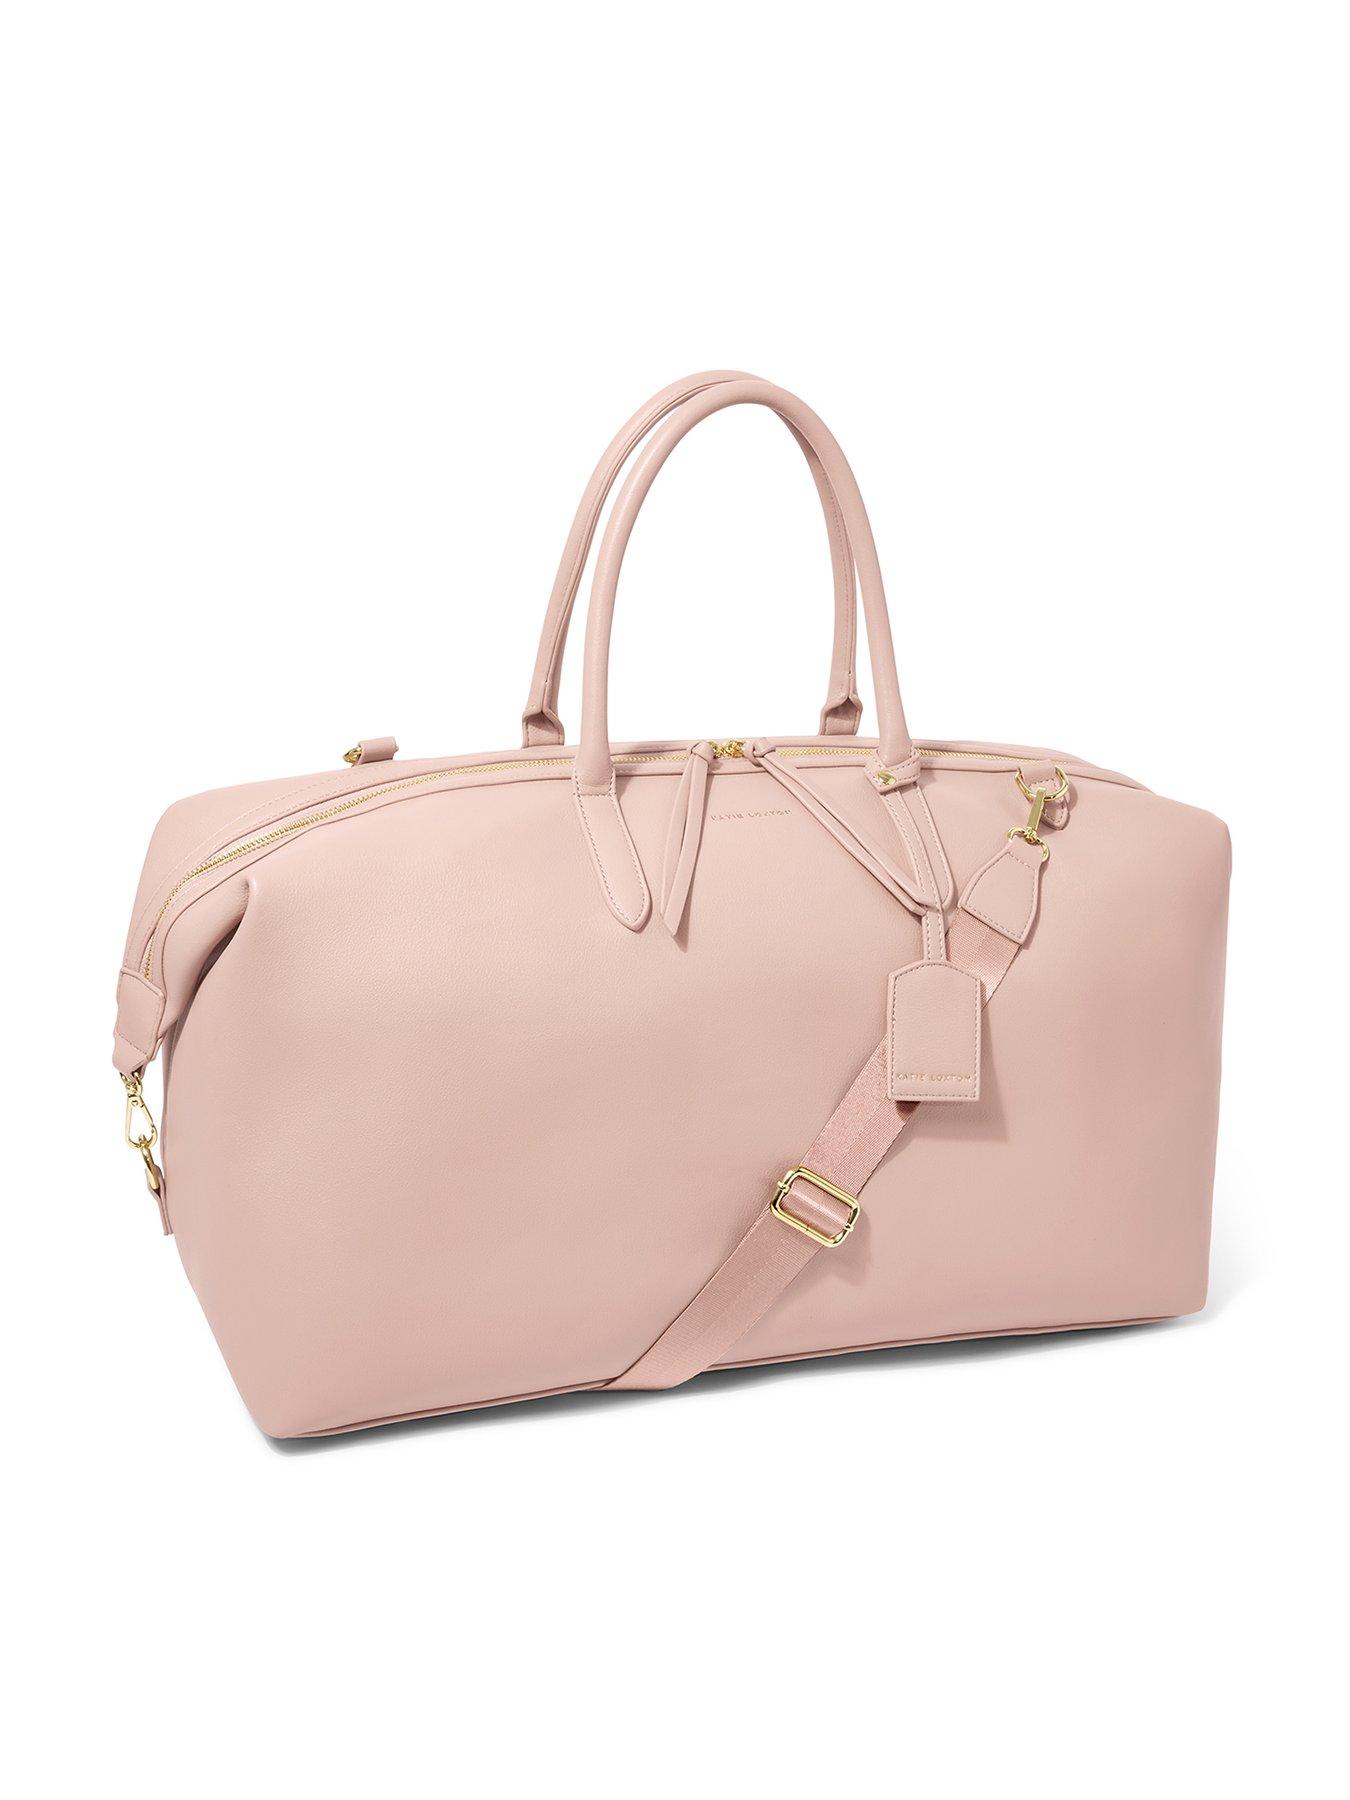 NEW LOUIS VUITTON, Limited Edition PINK Tassel, 10.5", Bag